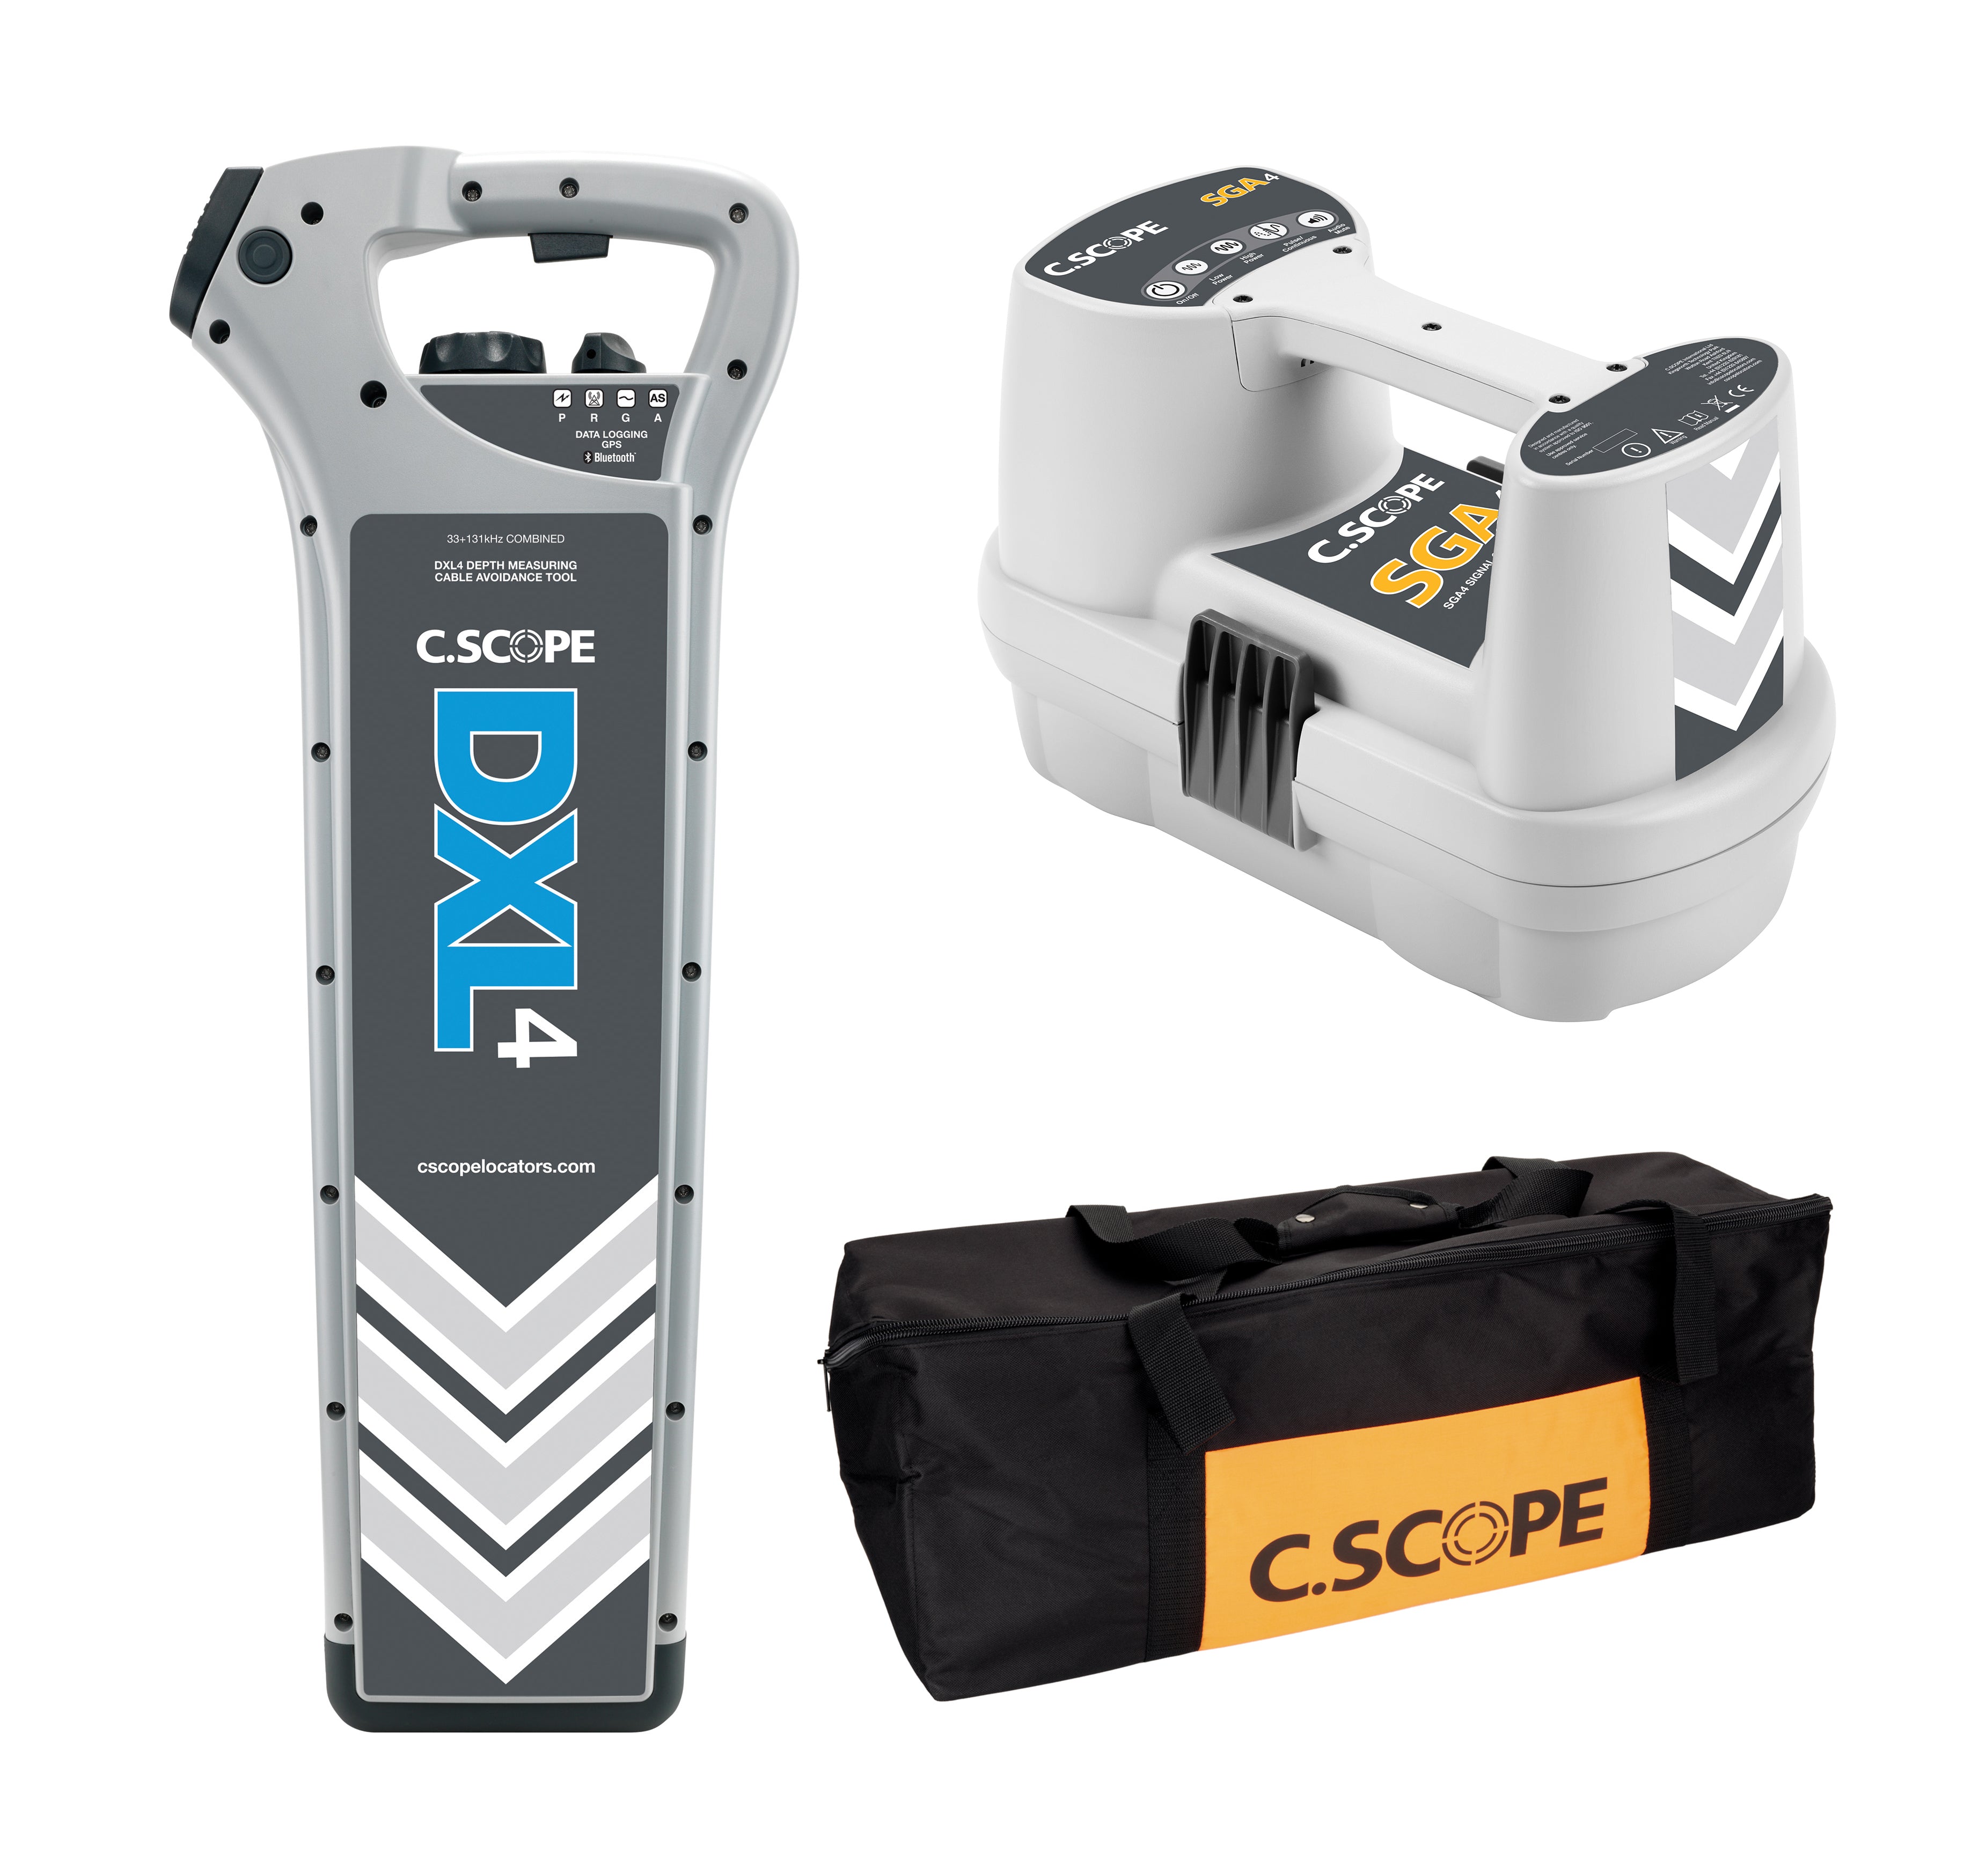 C.Scope DXL4-D Depth and Datalogging Cable Avoidance Kit with SGA4 and Bag - Subtech Safety Limited